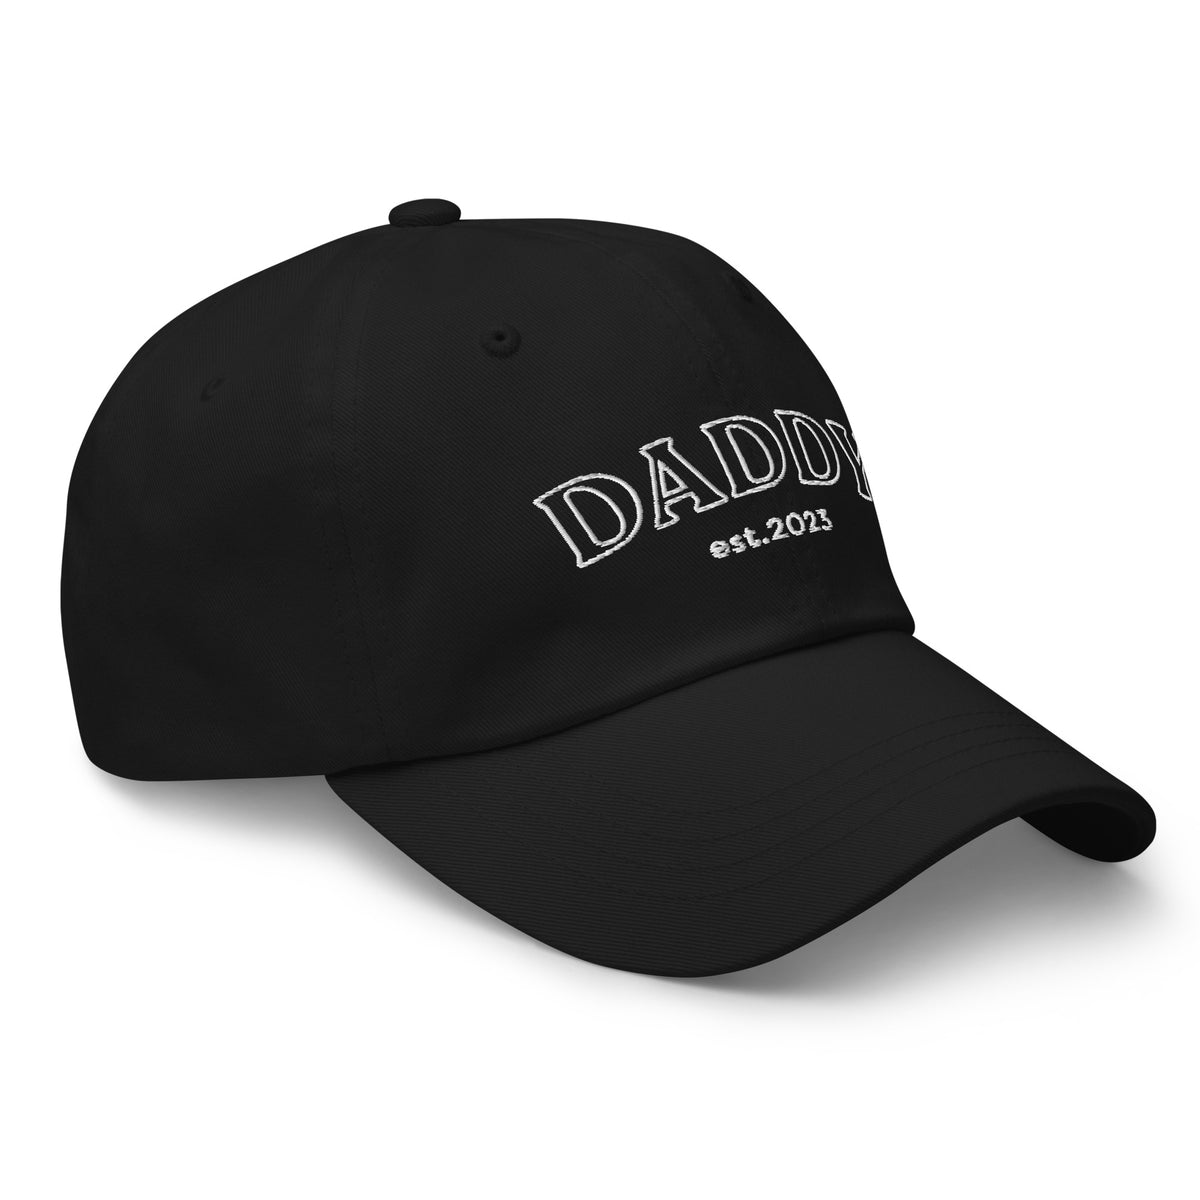 Casquette | Daddy established + date Coeur Tendre